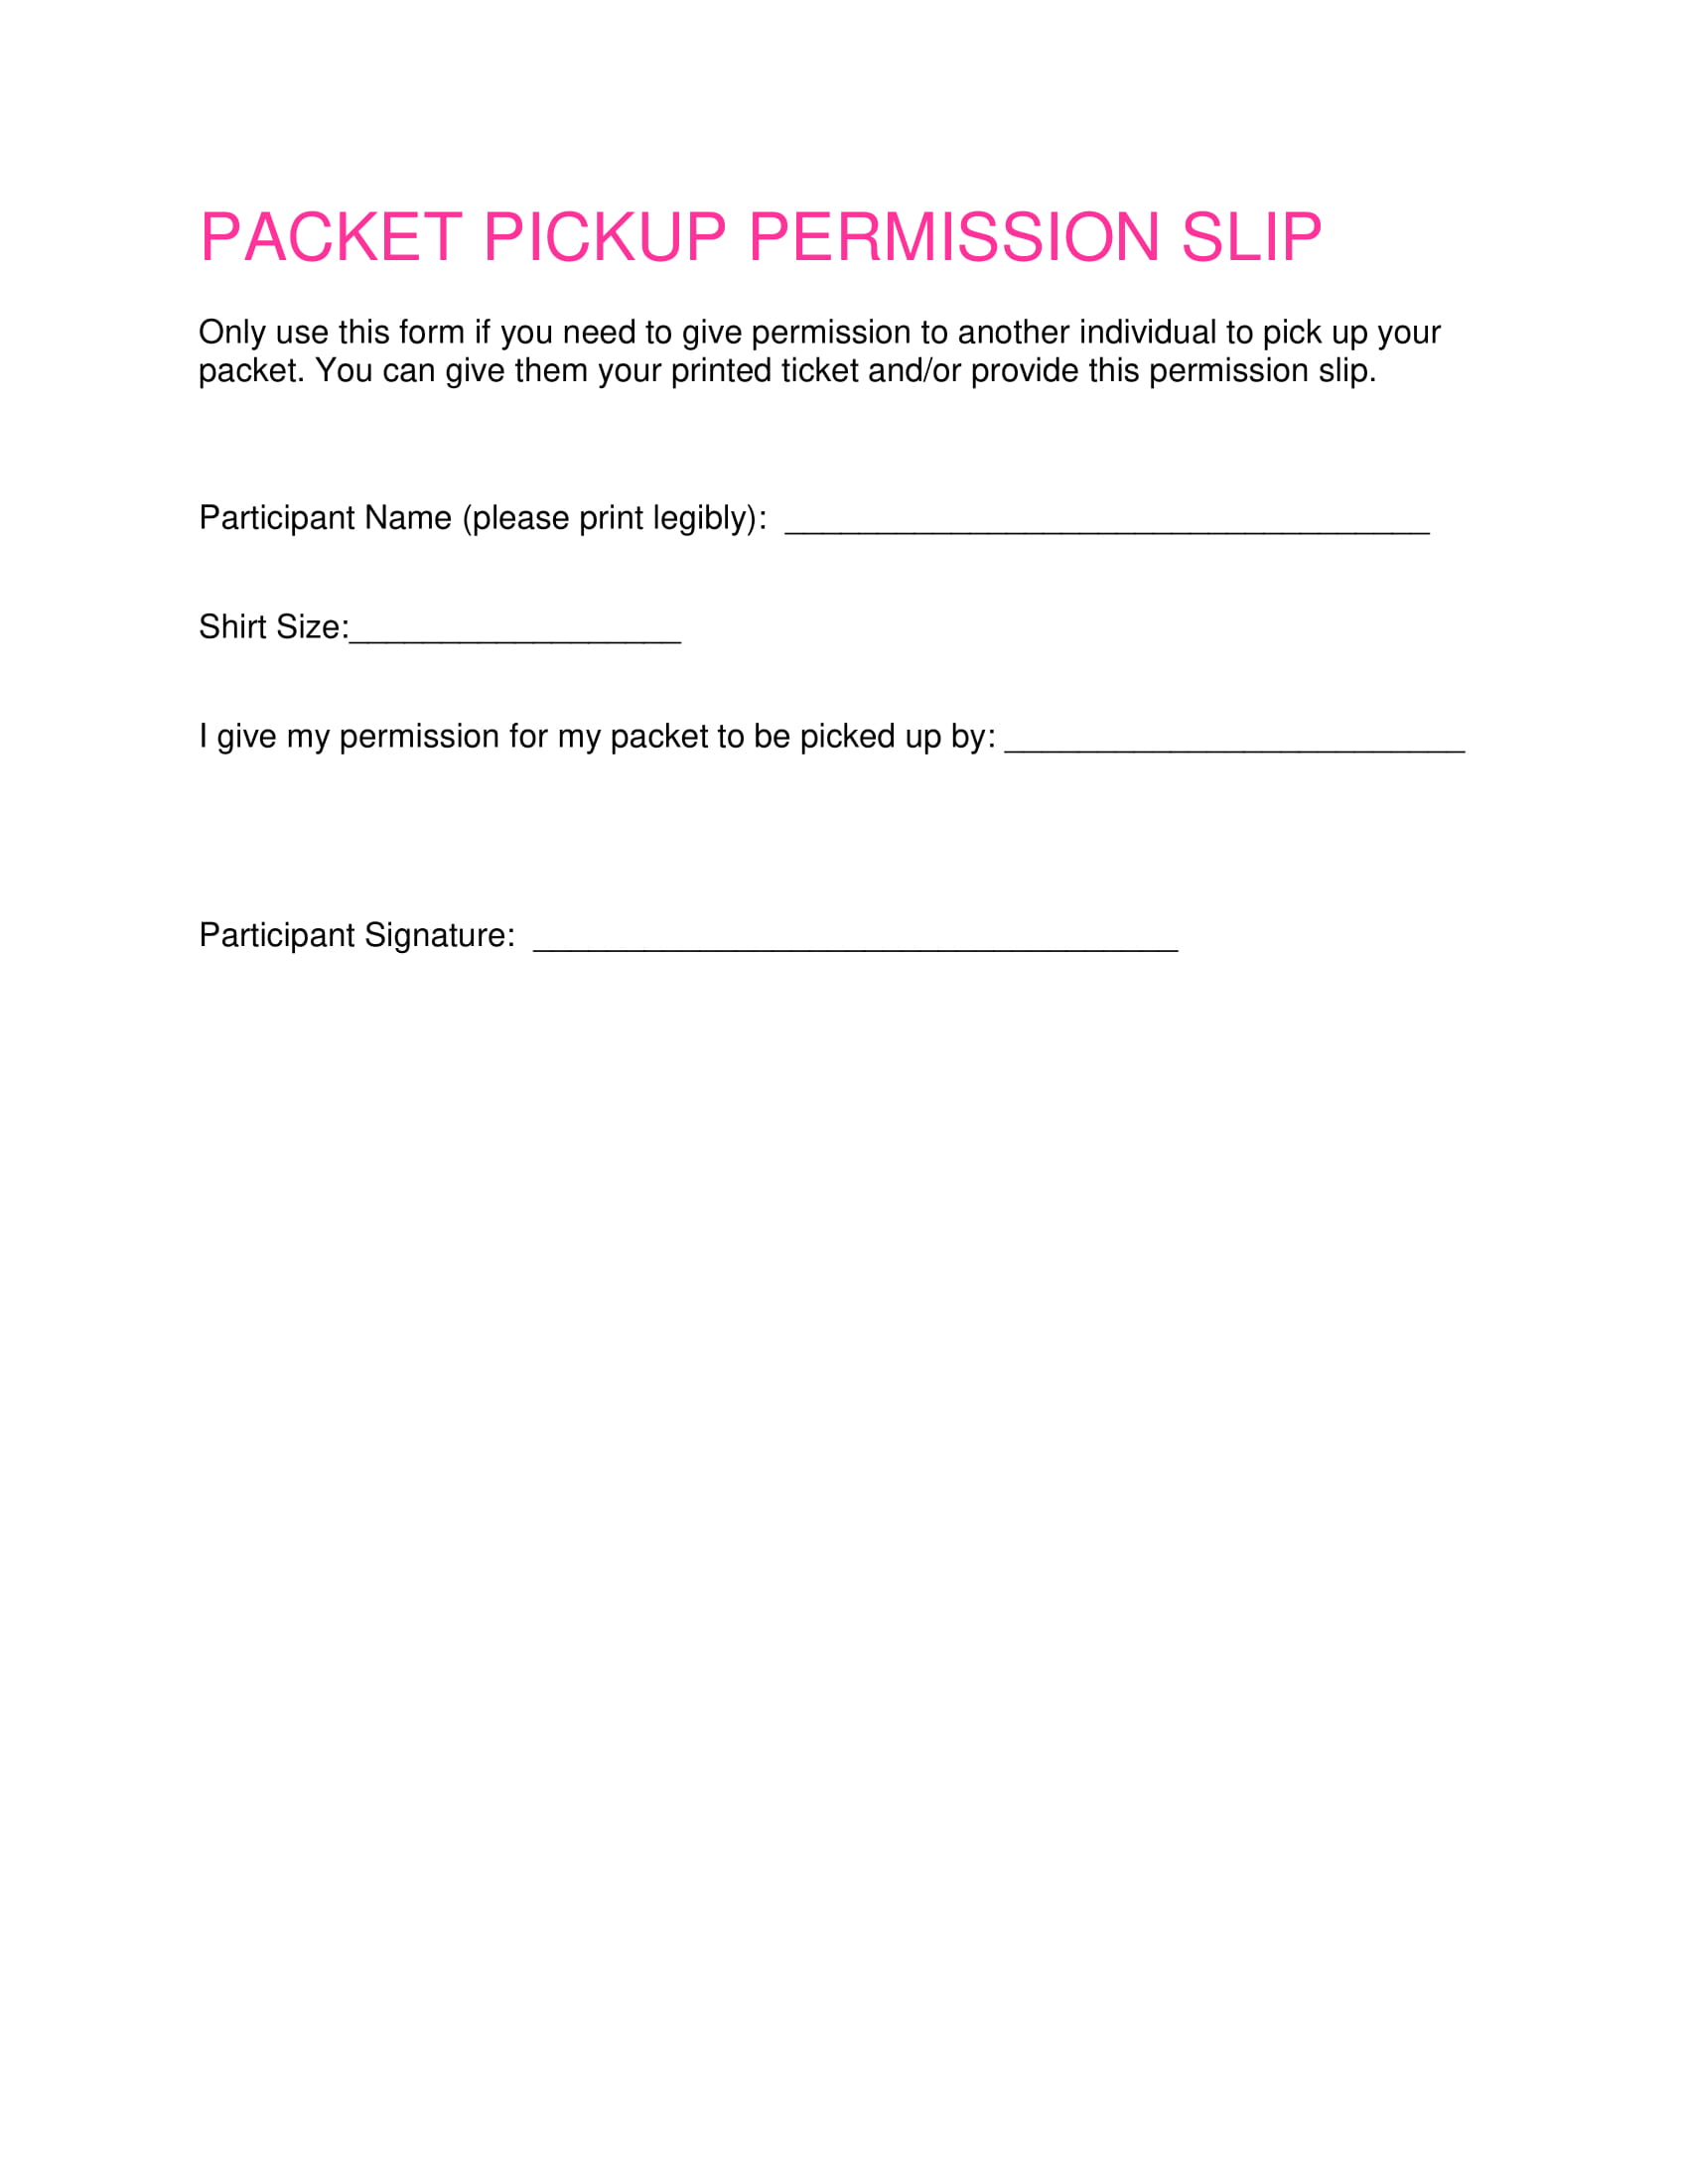 packet pickup permission slip example